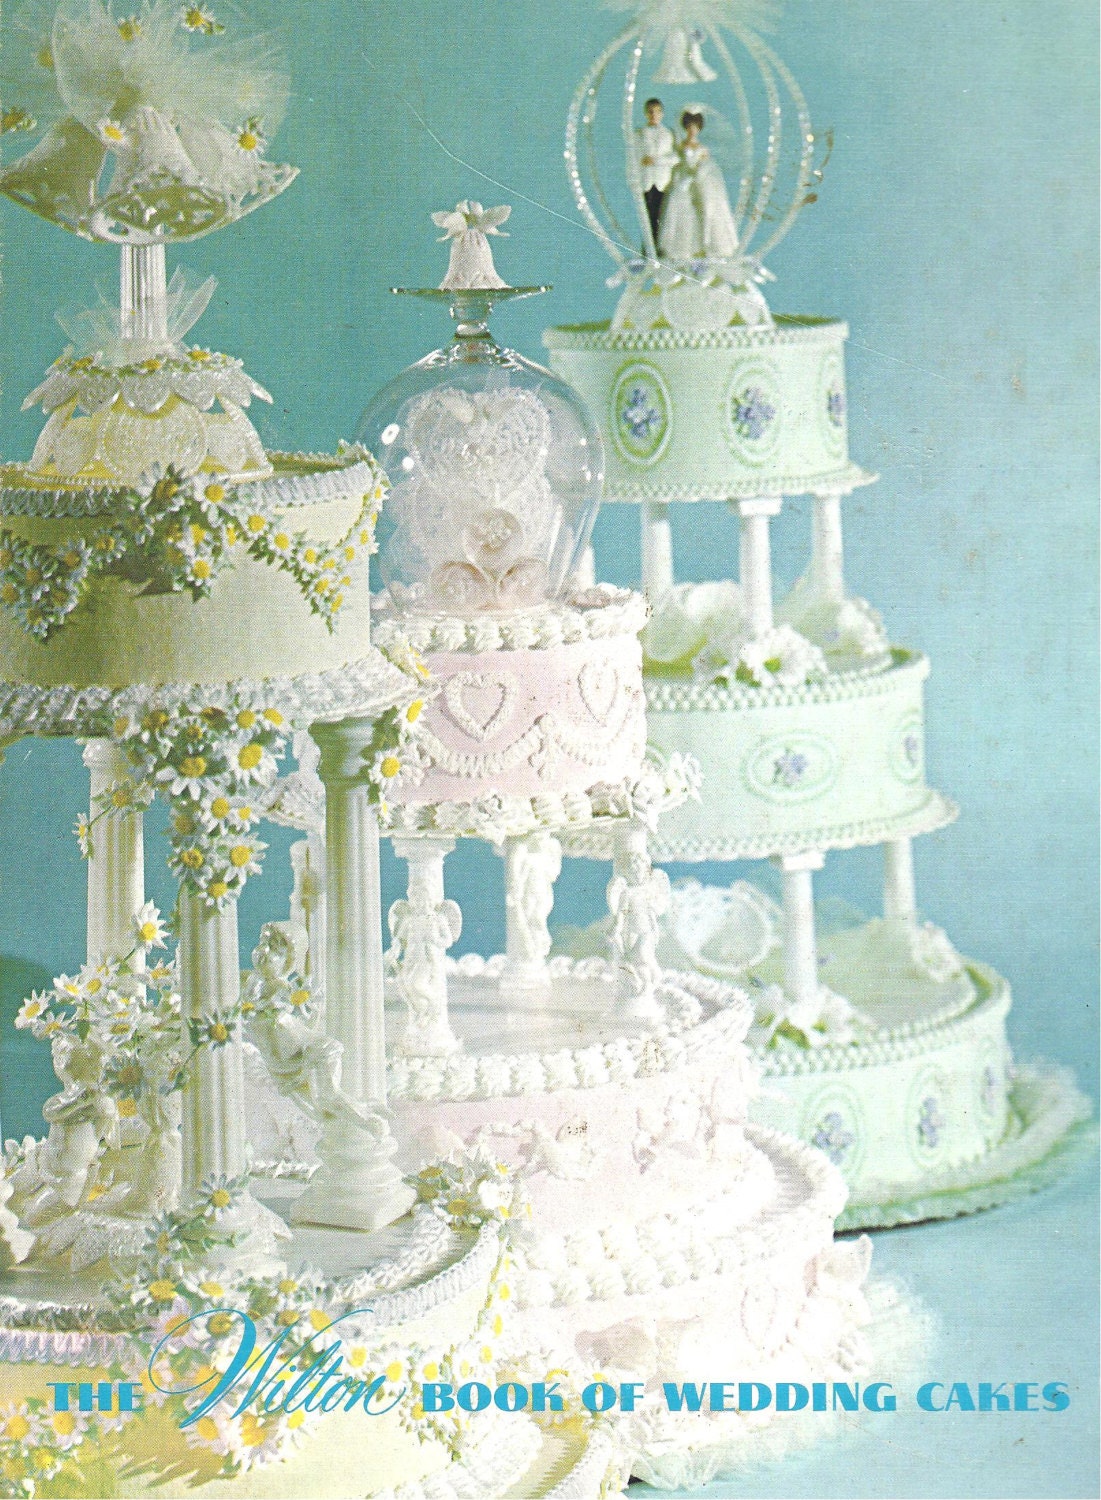 The WILTON Book Of WEDDING CAKES 1970s Cake Decorating Book